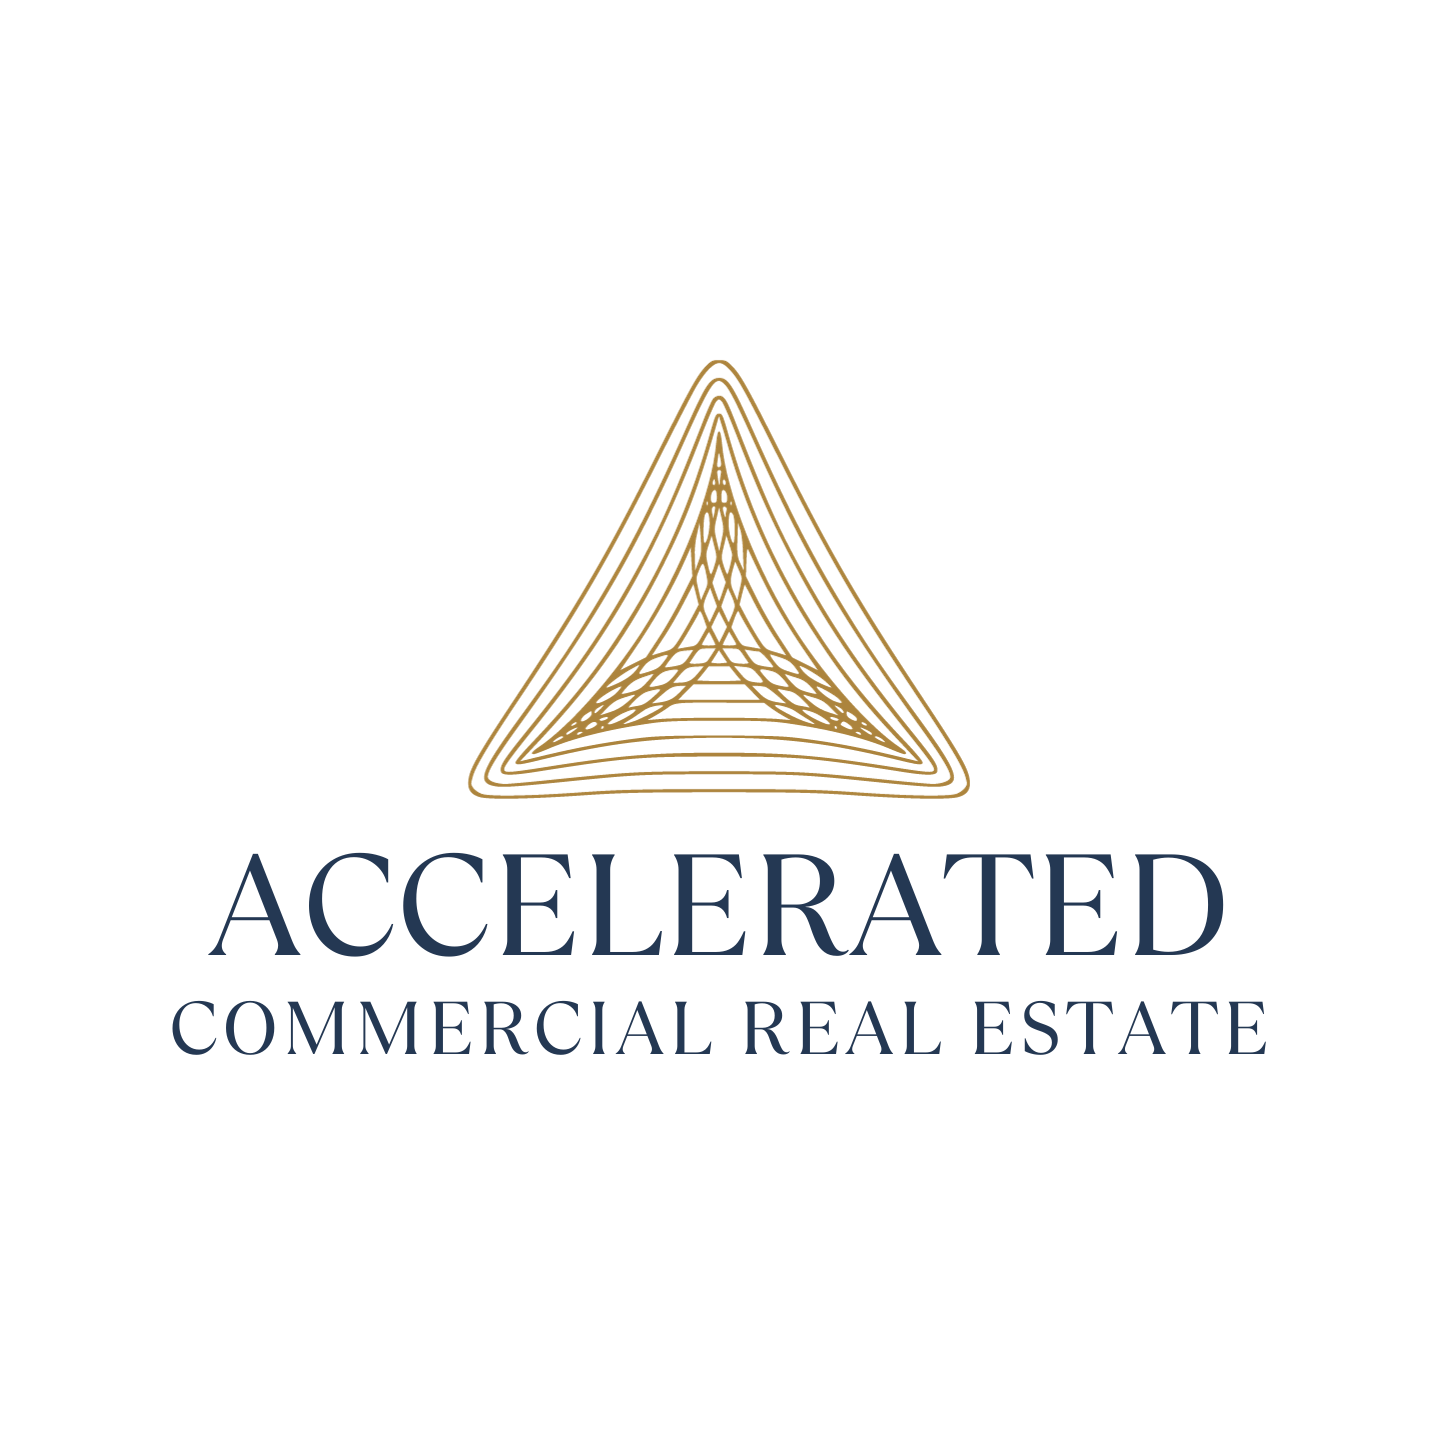 Accelerated Commercial Real Estate